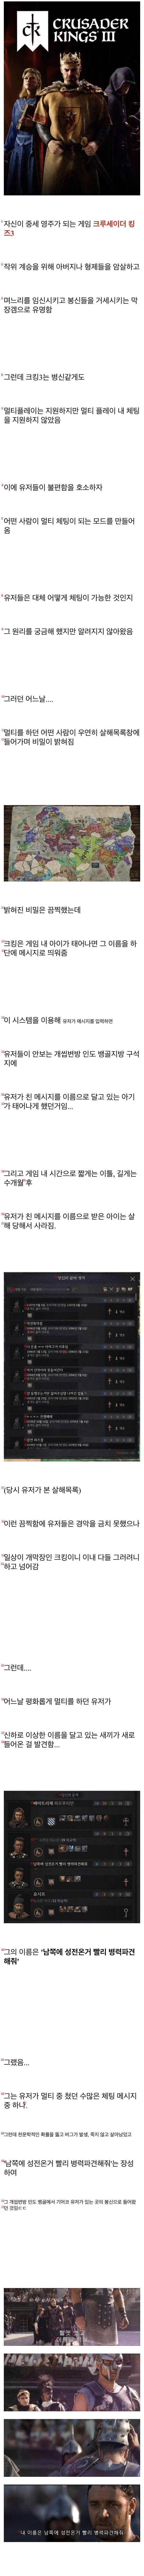 Multi-chat system for some game ㄷpjg어ᄂᆞᄂᆞᅥᆫ의